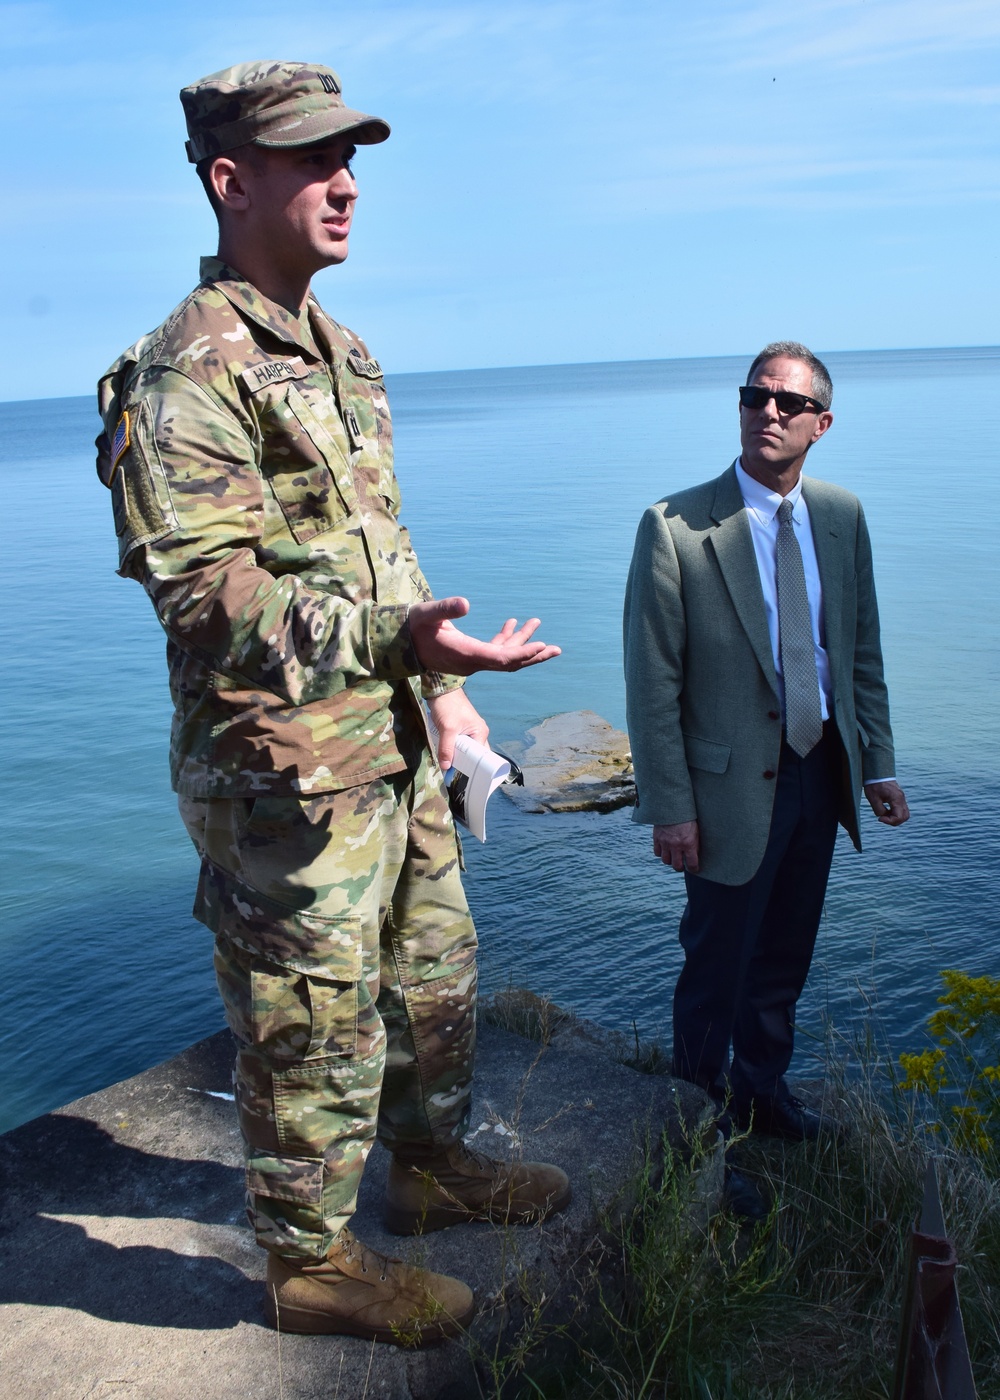 FCSA signing ceremony held at Old Fort Niagara